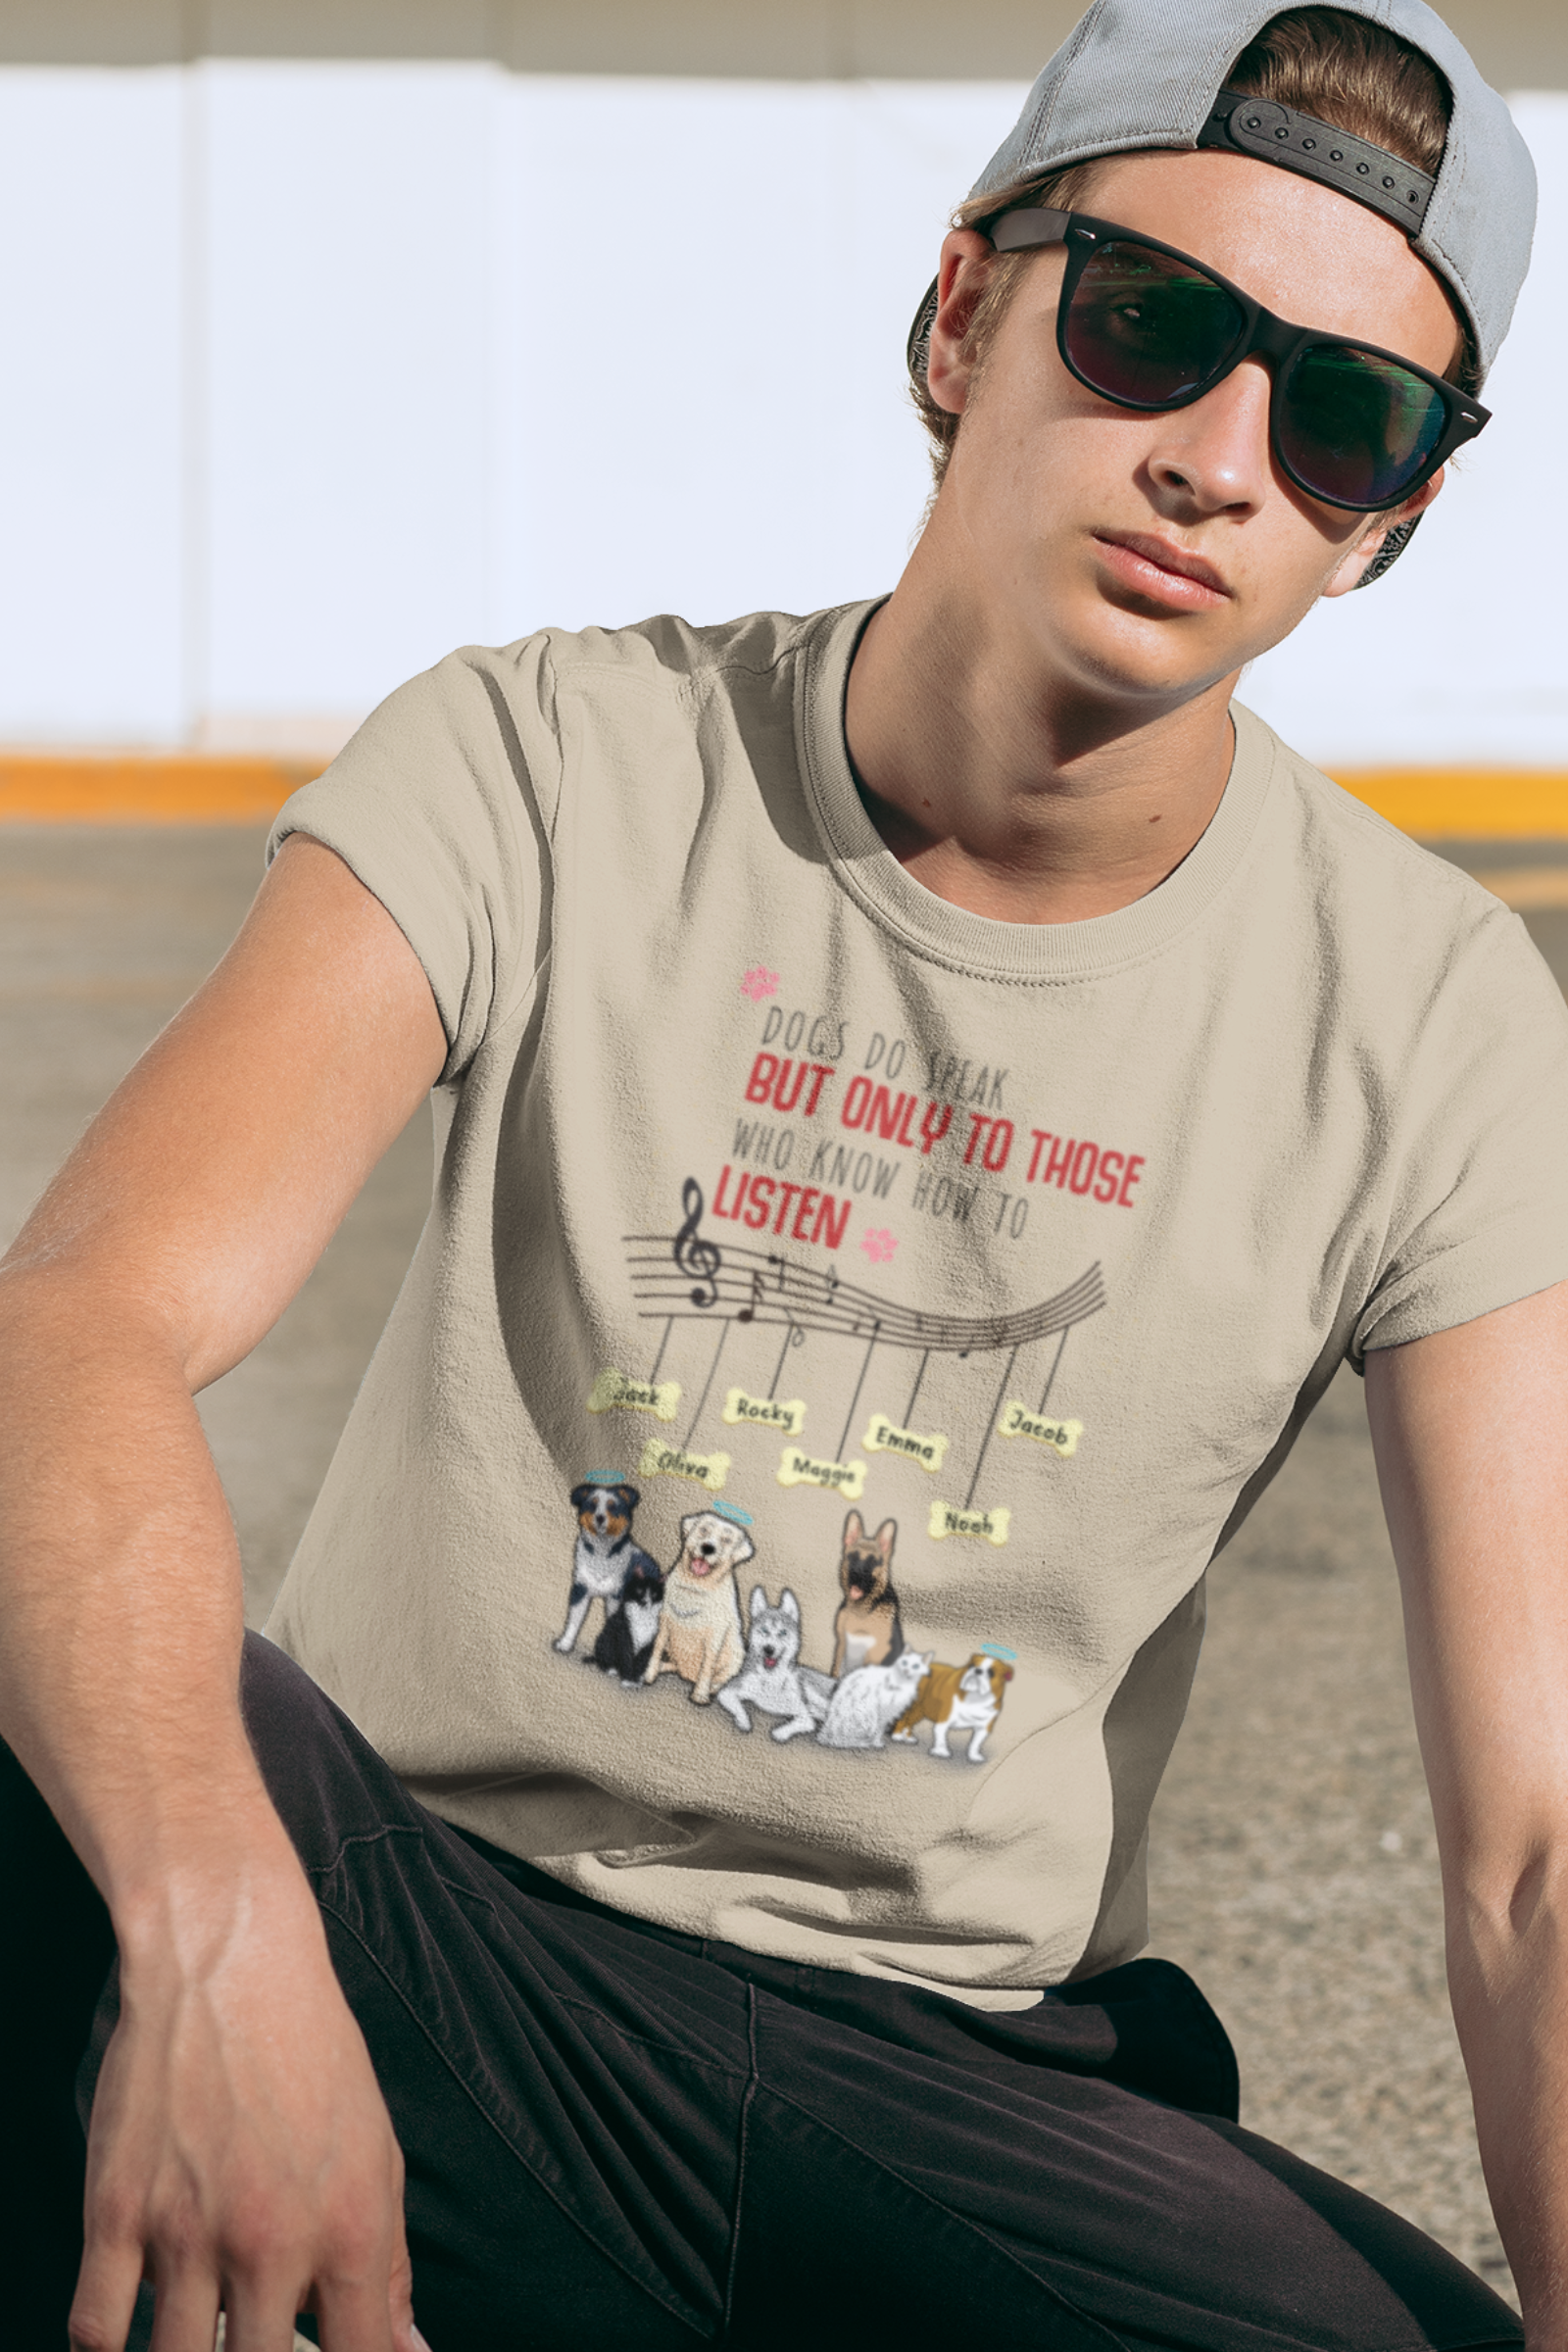 Dog Do Speak But Only to Those... Customized Dog Lover Tee